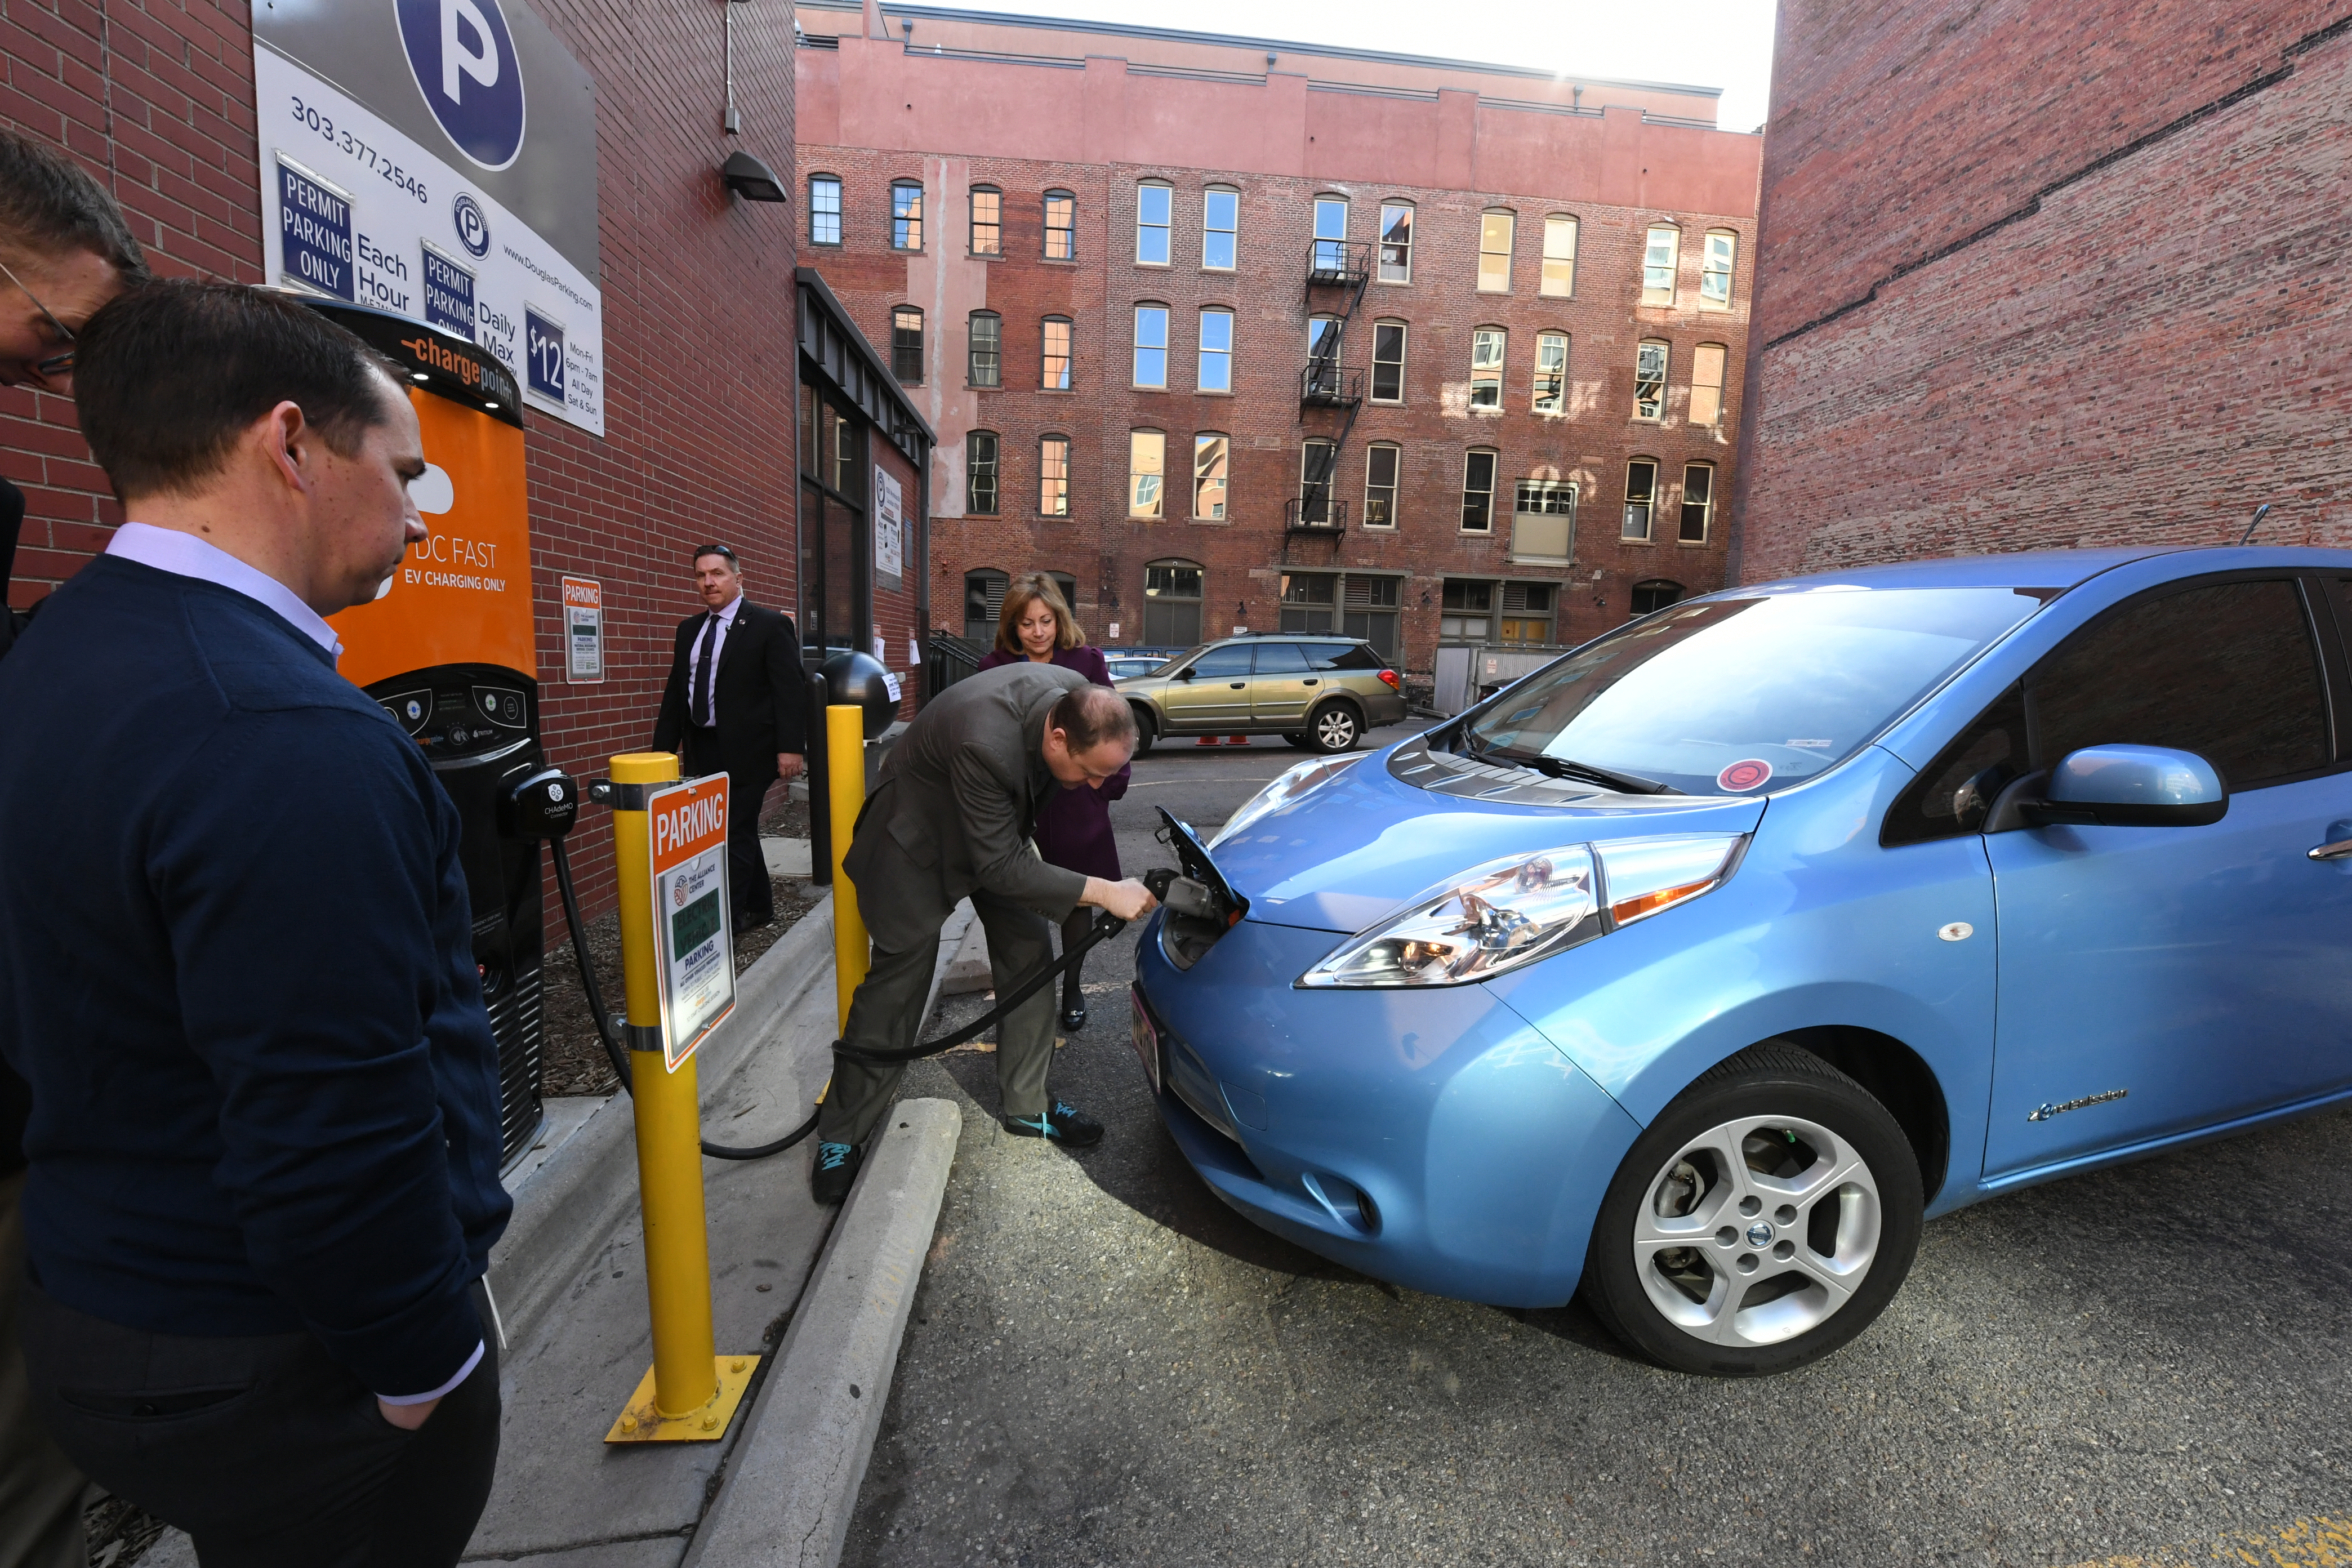 Governor Polis Plugging In an Electric Car